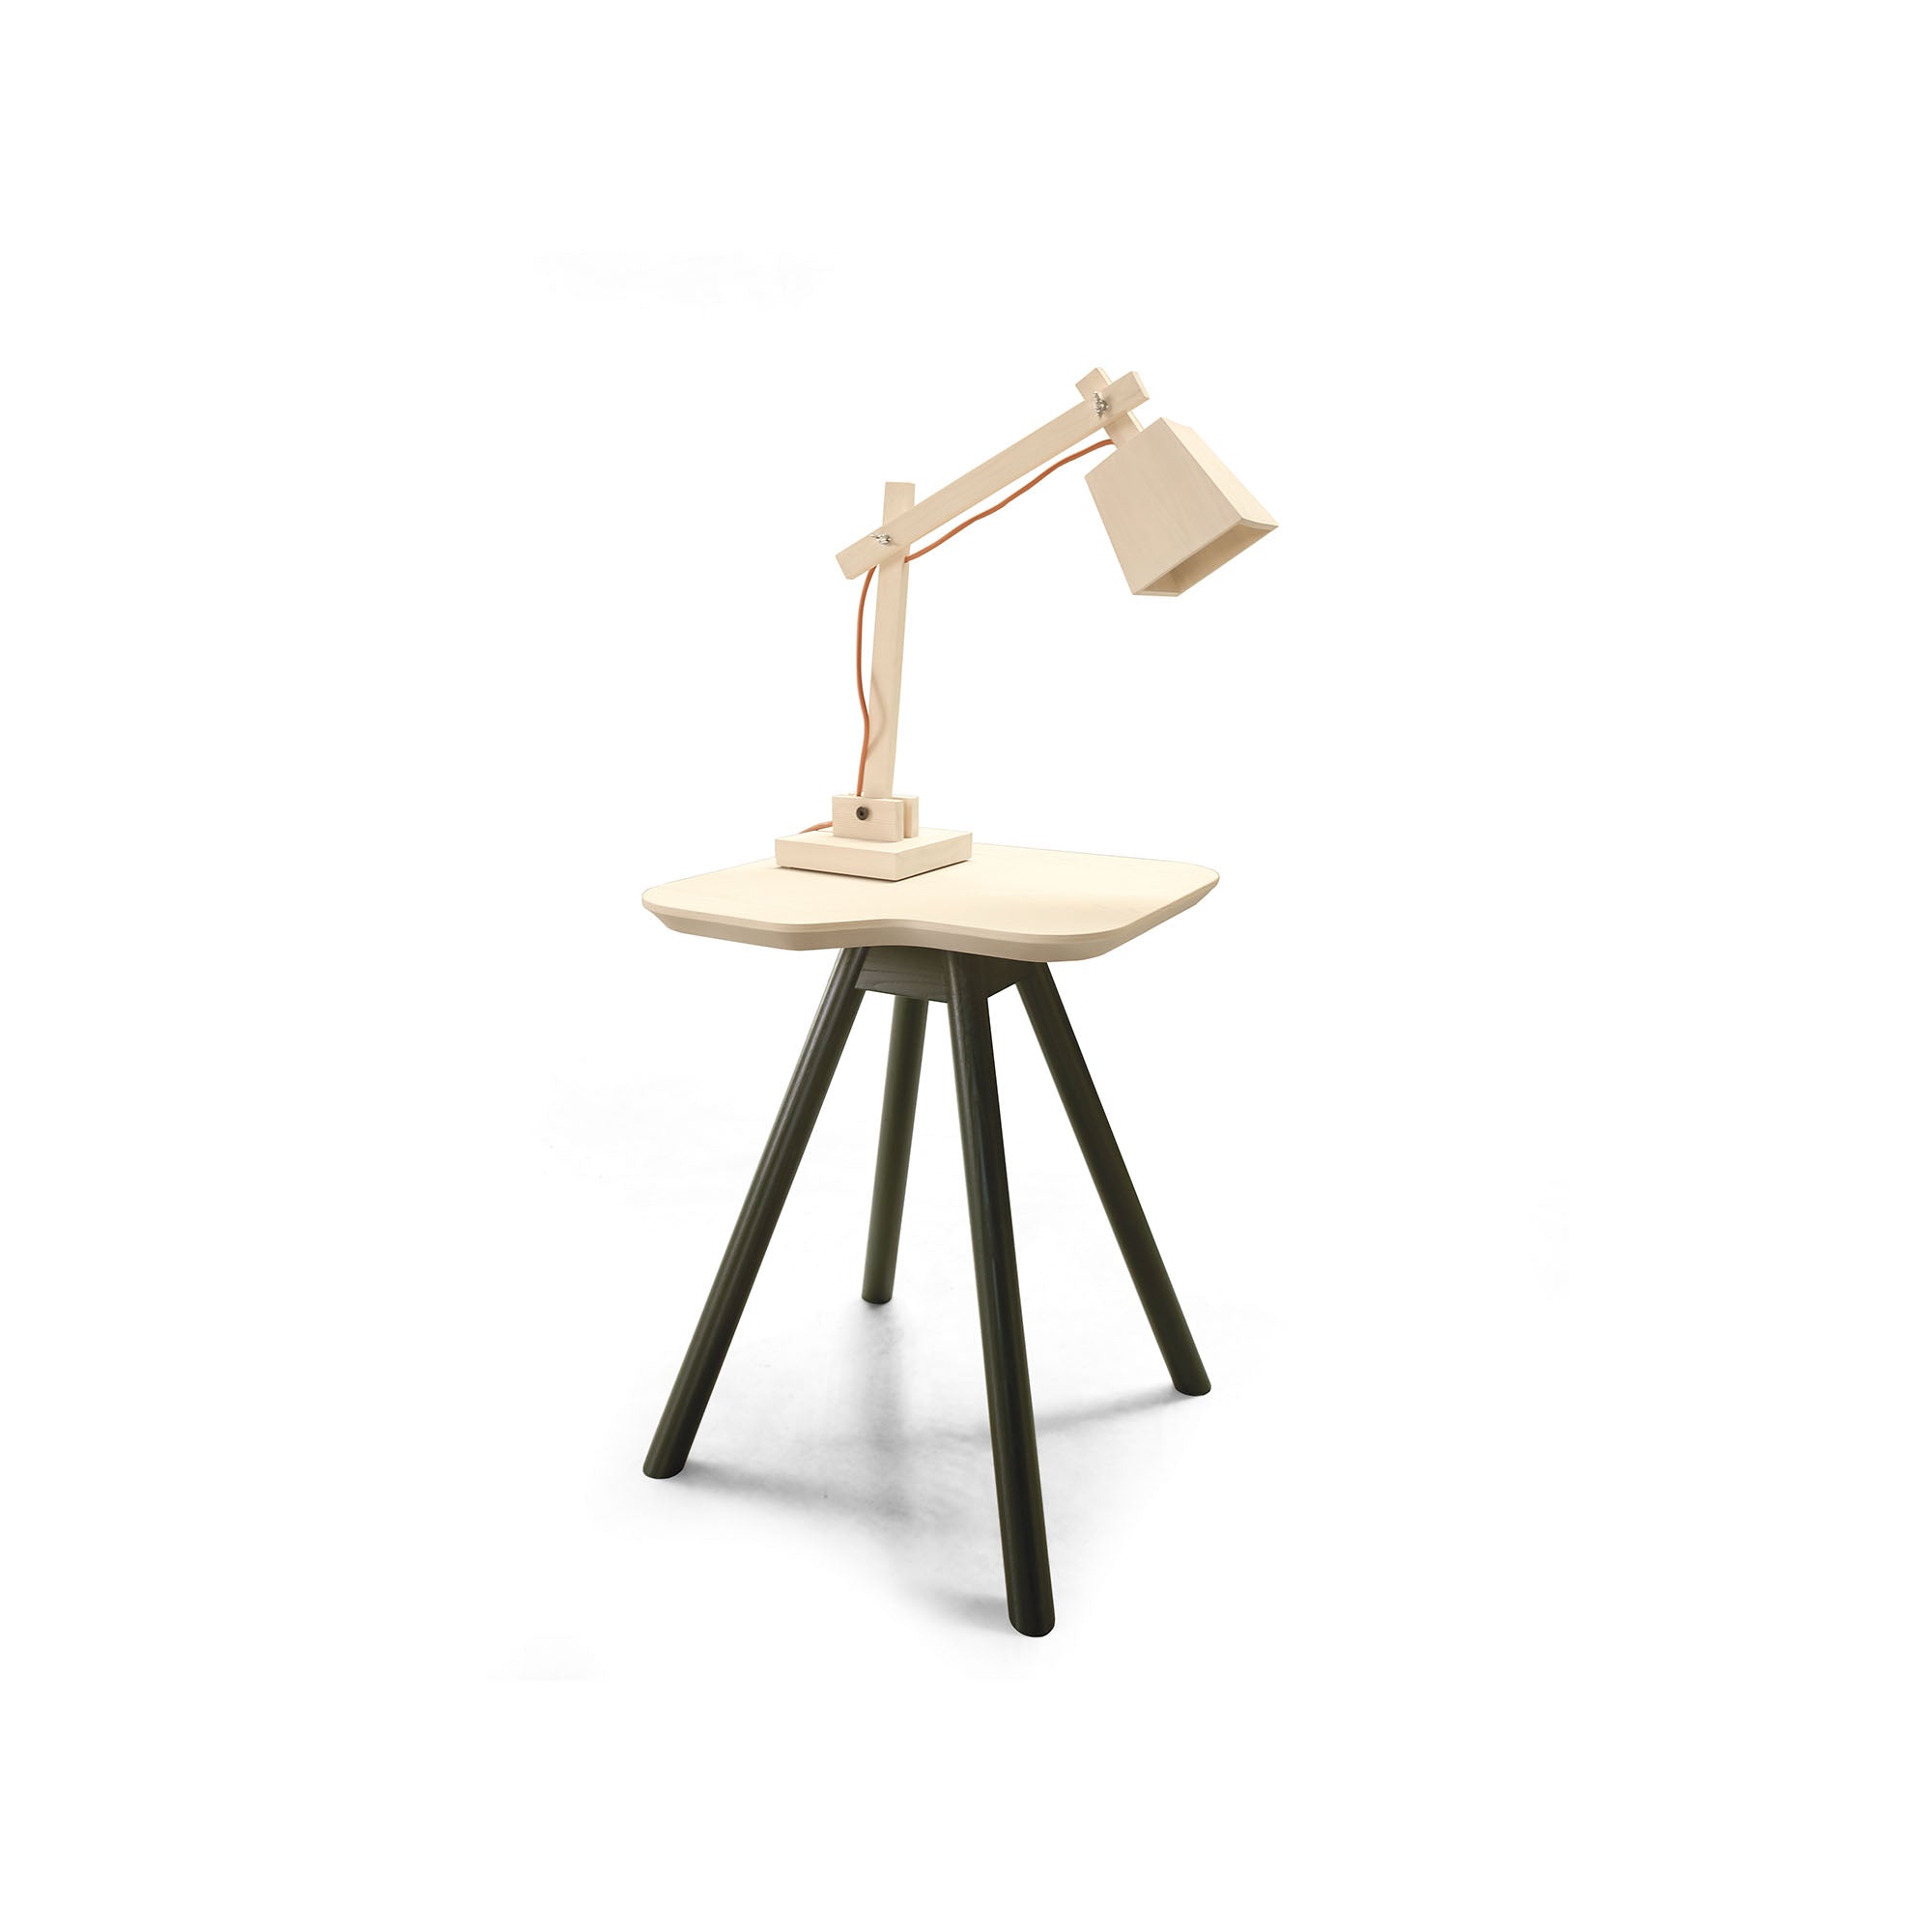 AKY SMALL Table natural top with lamp, black frame